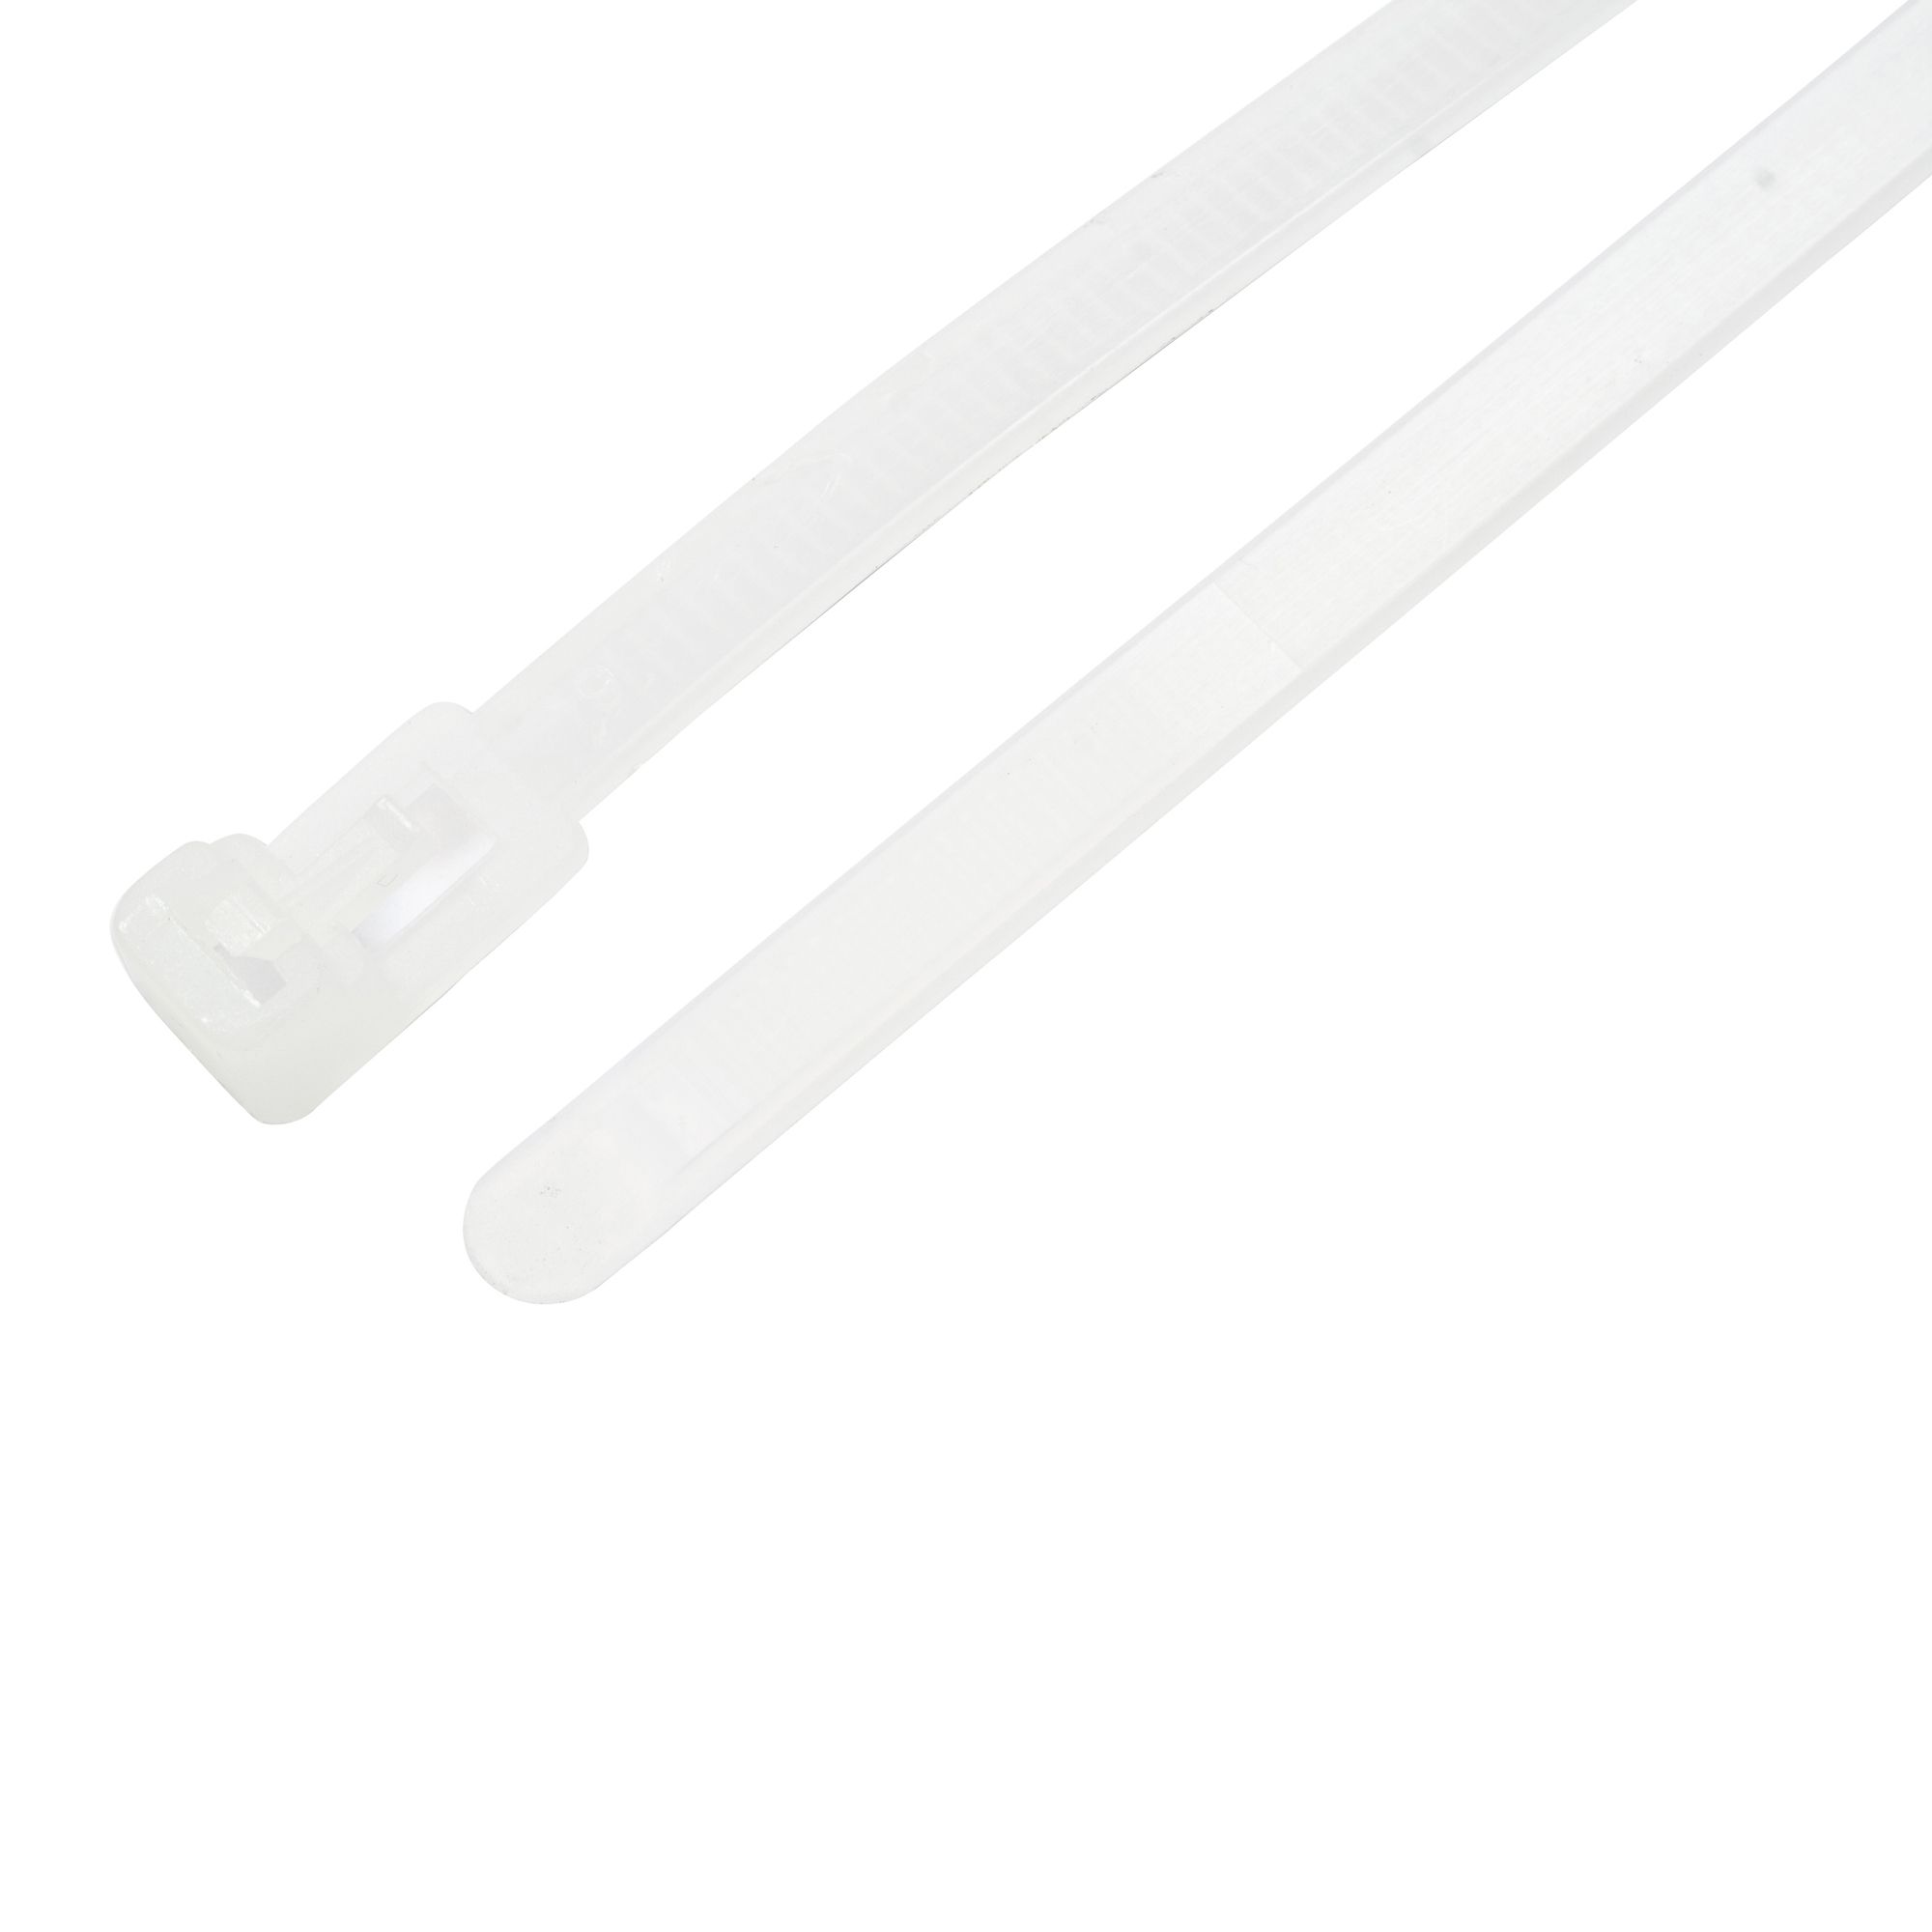 B&Q Releasable White Cable tie (L)295mm, Pack of 50 | DIY at B&Q